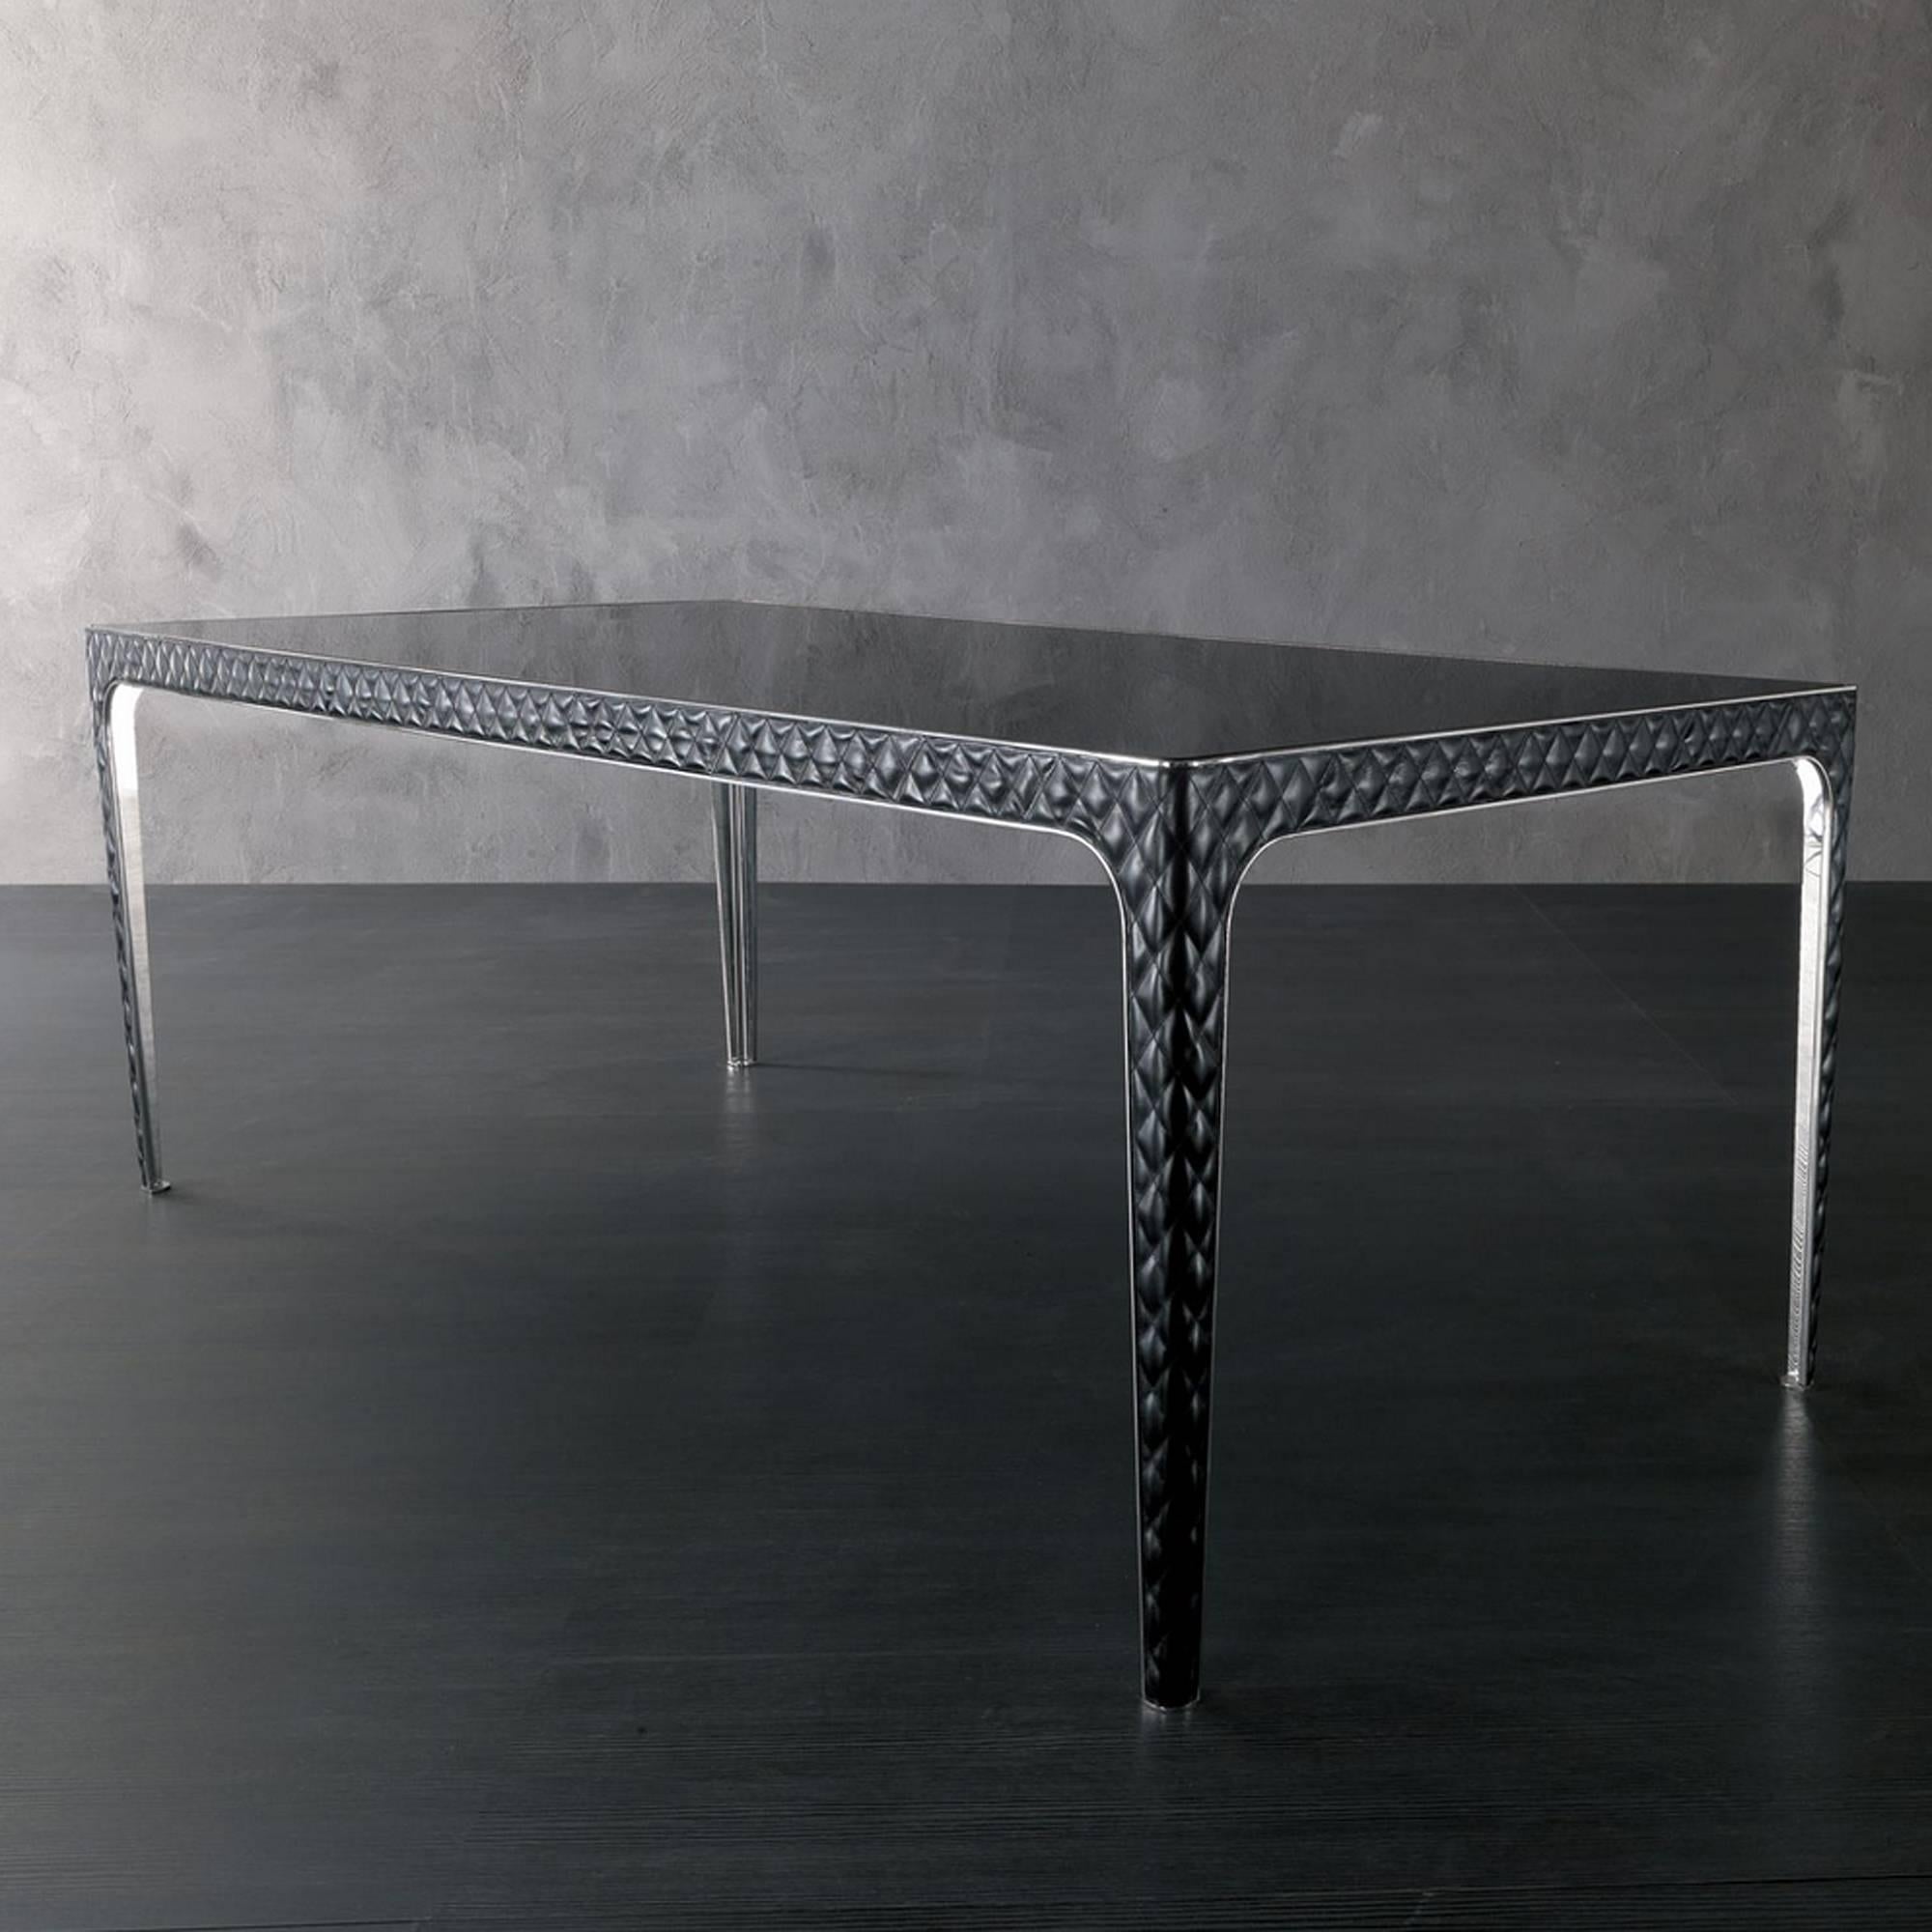 Dining table with structure in polished stainless steel
with black glass top. Legs covered with capitonated black 
genuine leather (Cat C).
Available in:
L201,2xD112,2xH76,3cm, price: 15900,00€.
L242,2xD112,2xH76,3cm, price: